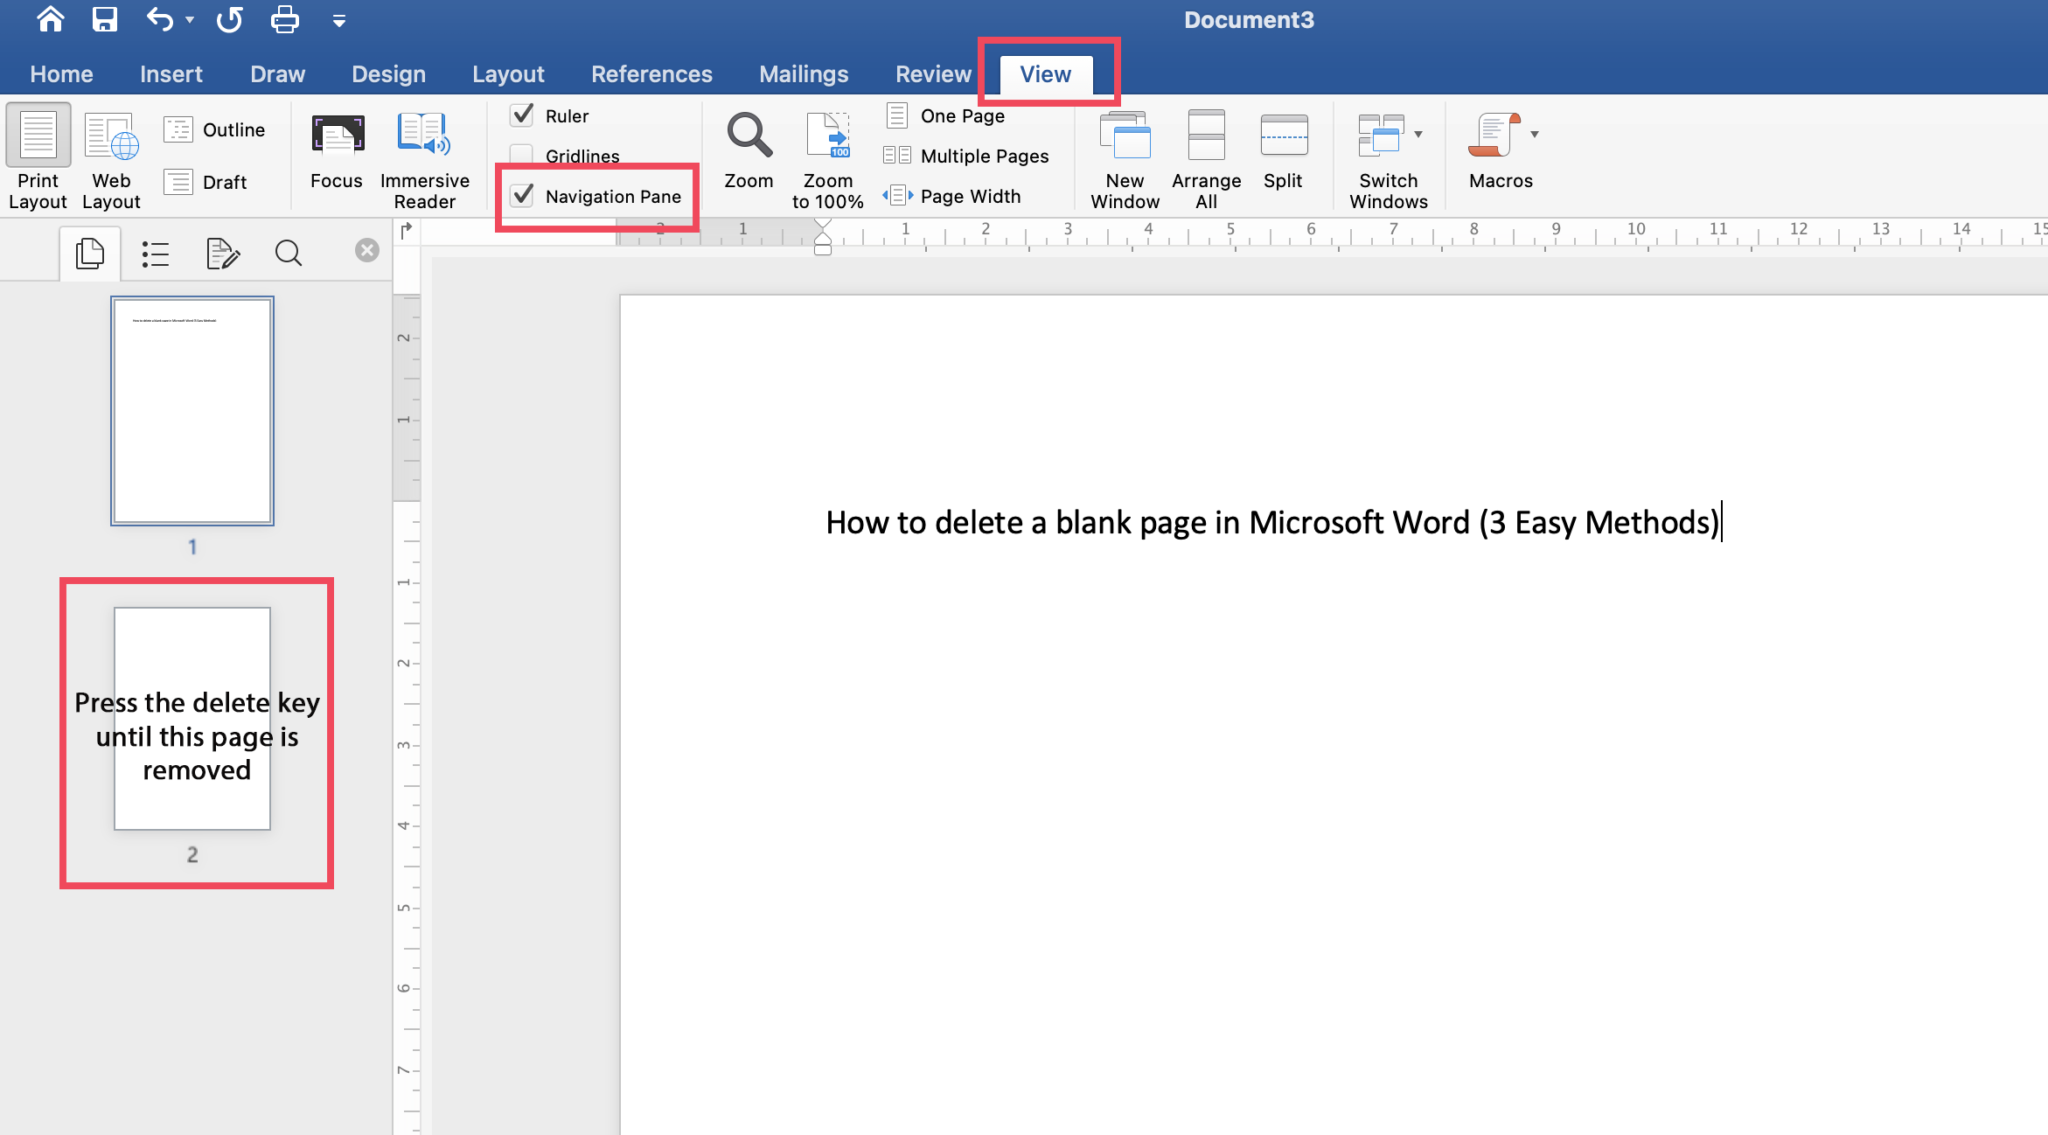 how-to-delete-page-in-word-step-by-step-guide-laptrinhx-riset